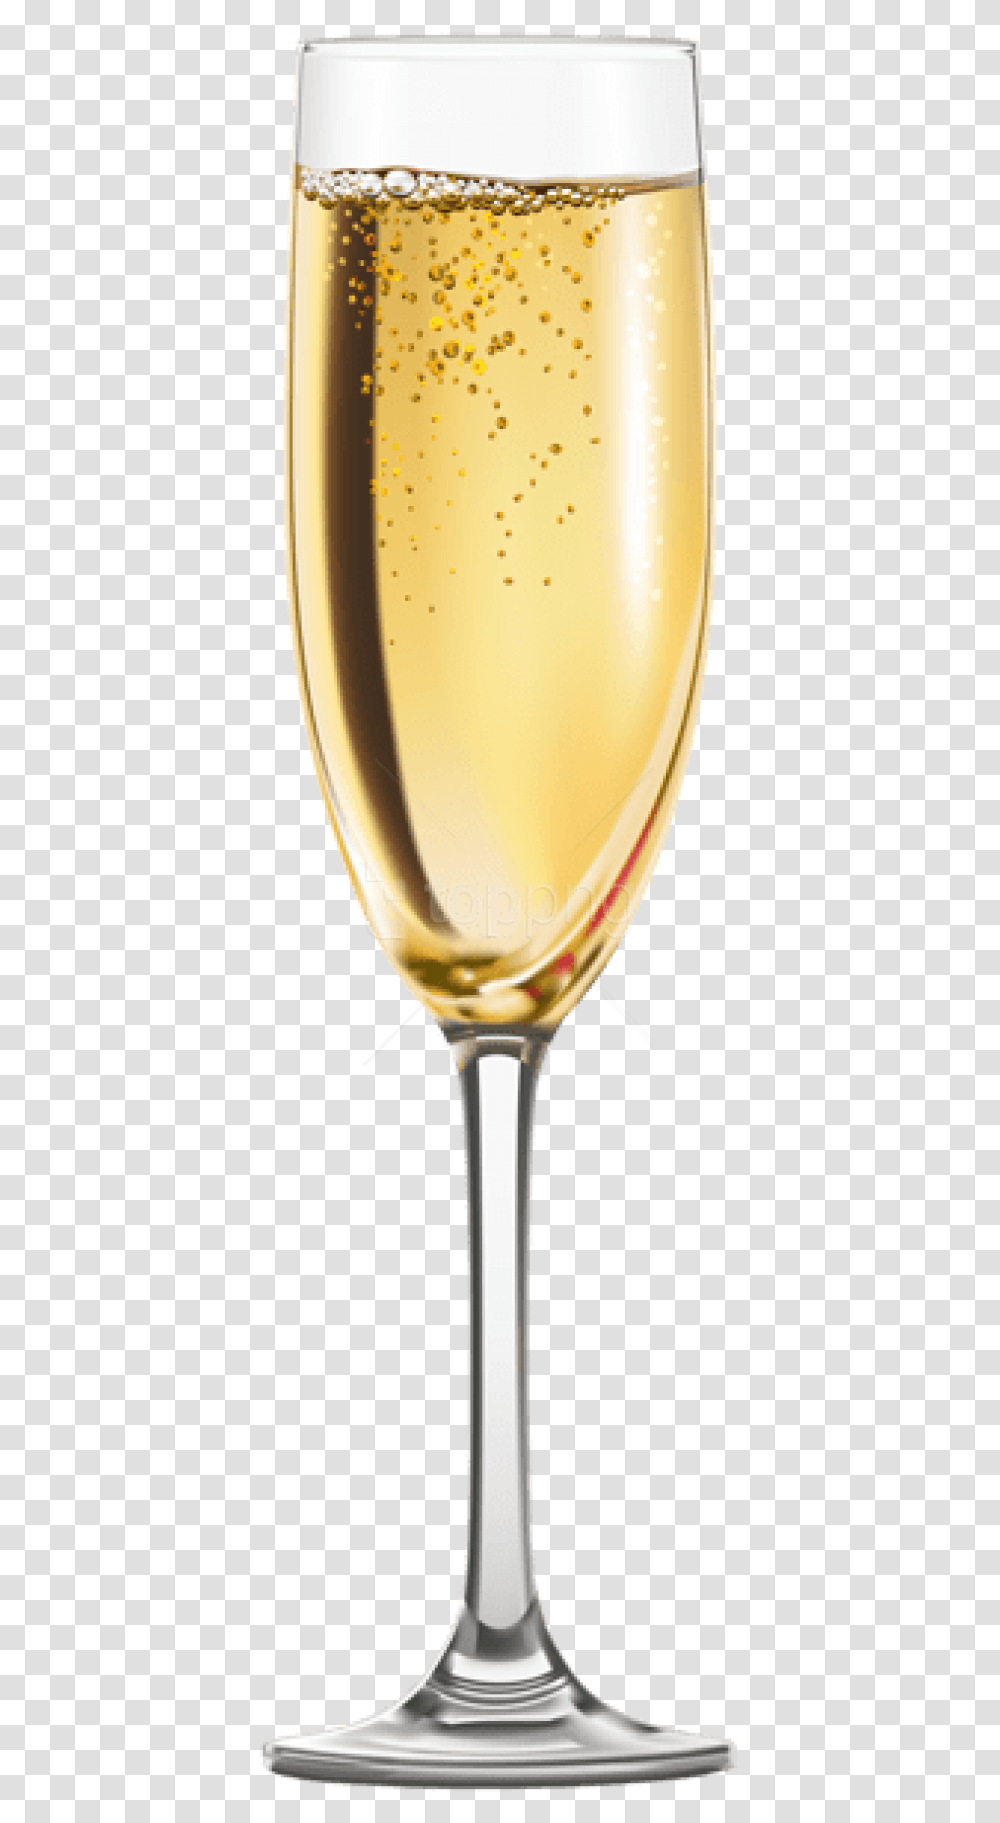 Champagne Bottle Popping Collection Free Aztec Glass Of Champagne, Wine Glass, Alcohol, Beverage, Drink Transparent Png